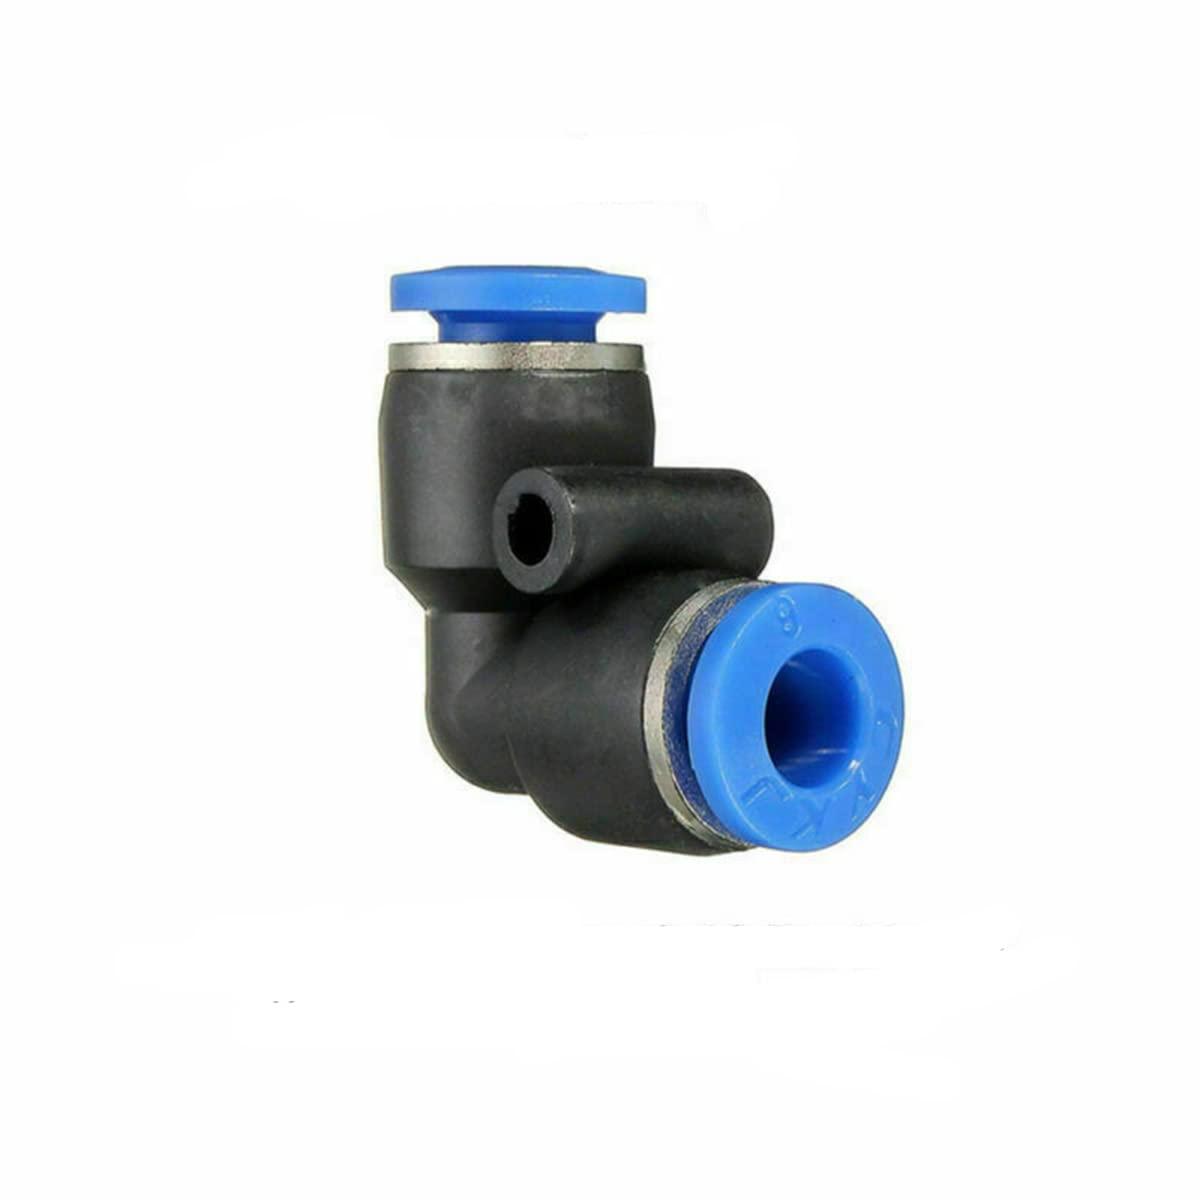 Pneumatic Connectors,6mm Pneumatic Fittings Push in Elbow Connectors Water Hose Quick Connect for Air Water Hose